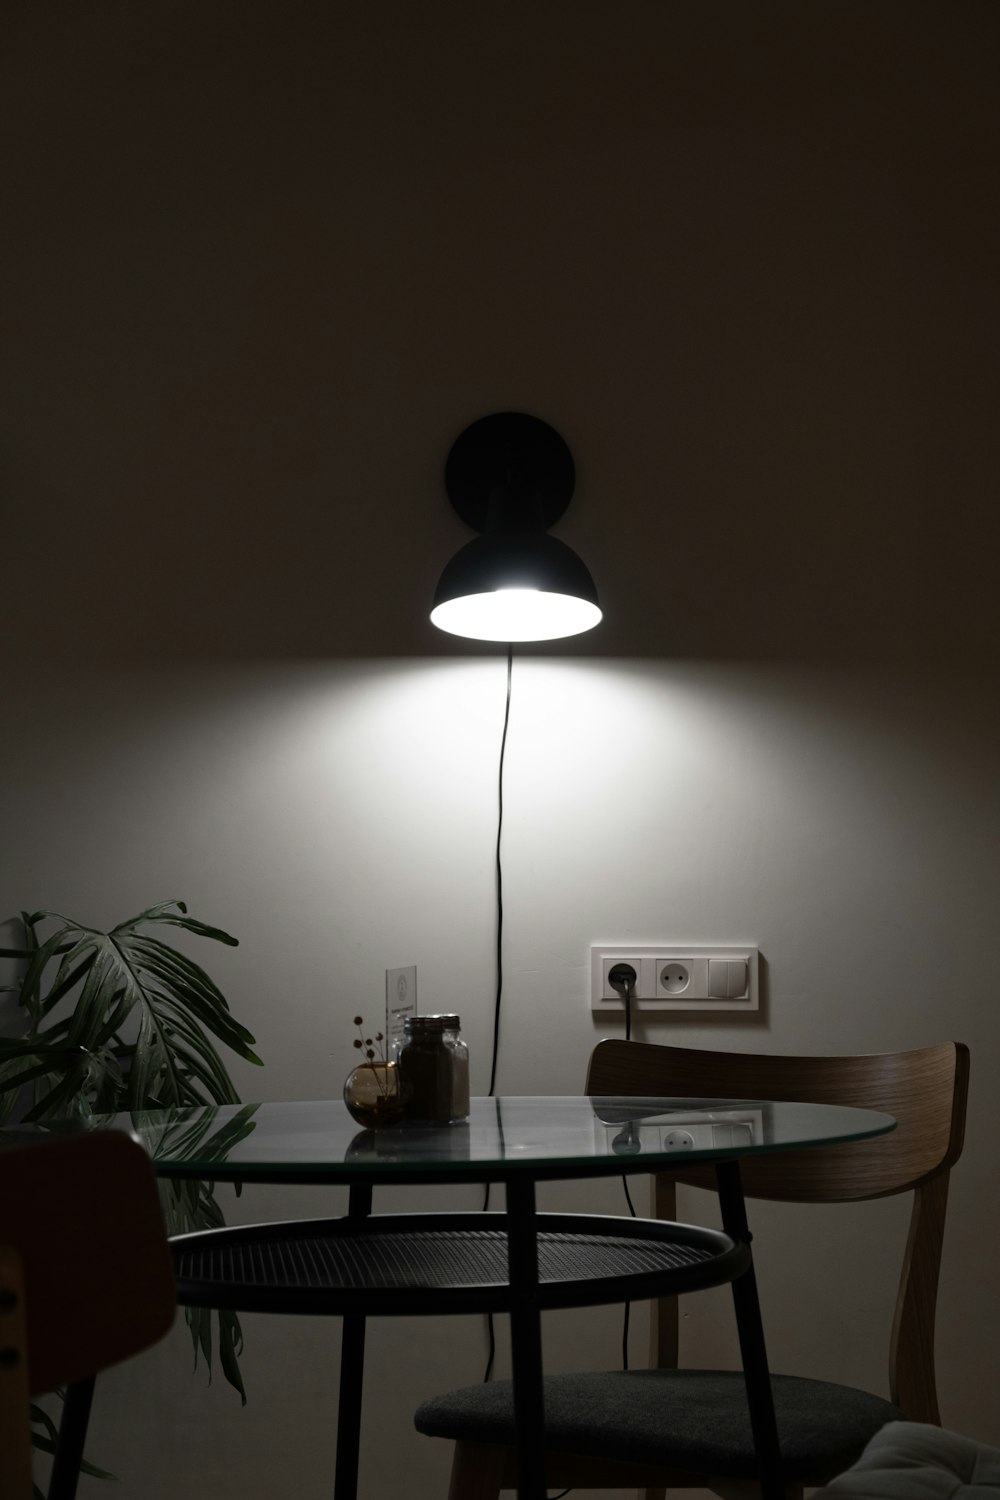 black pendant lamp turned on near brown wooden table